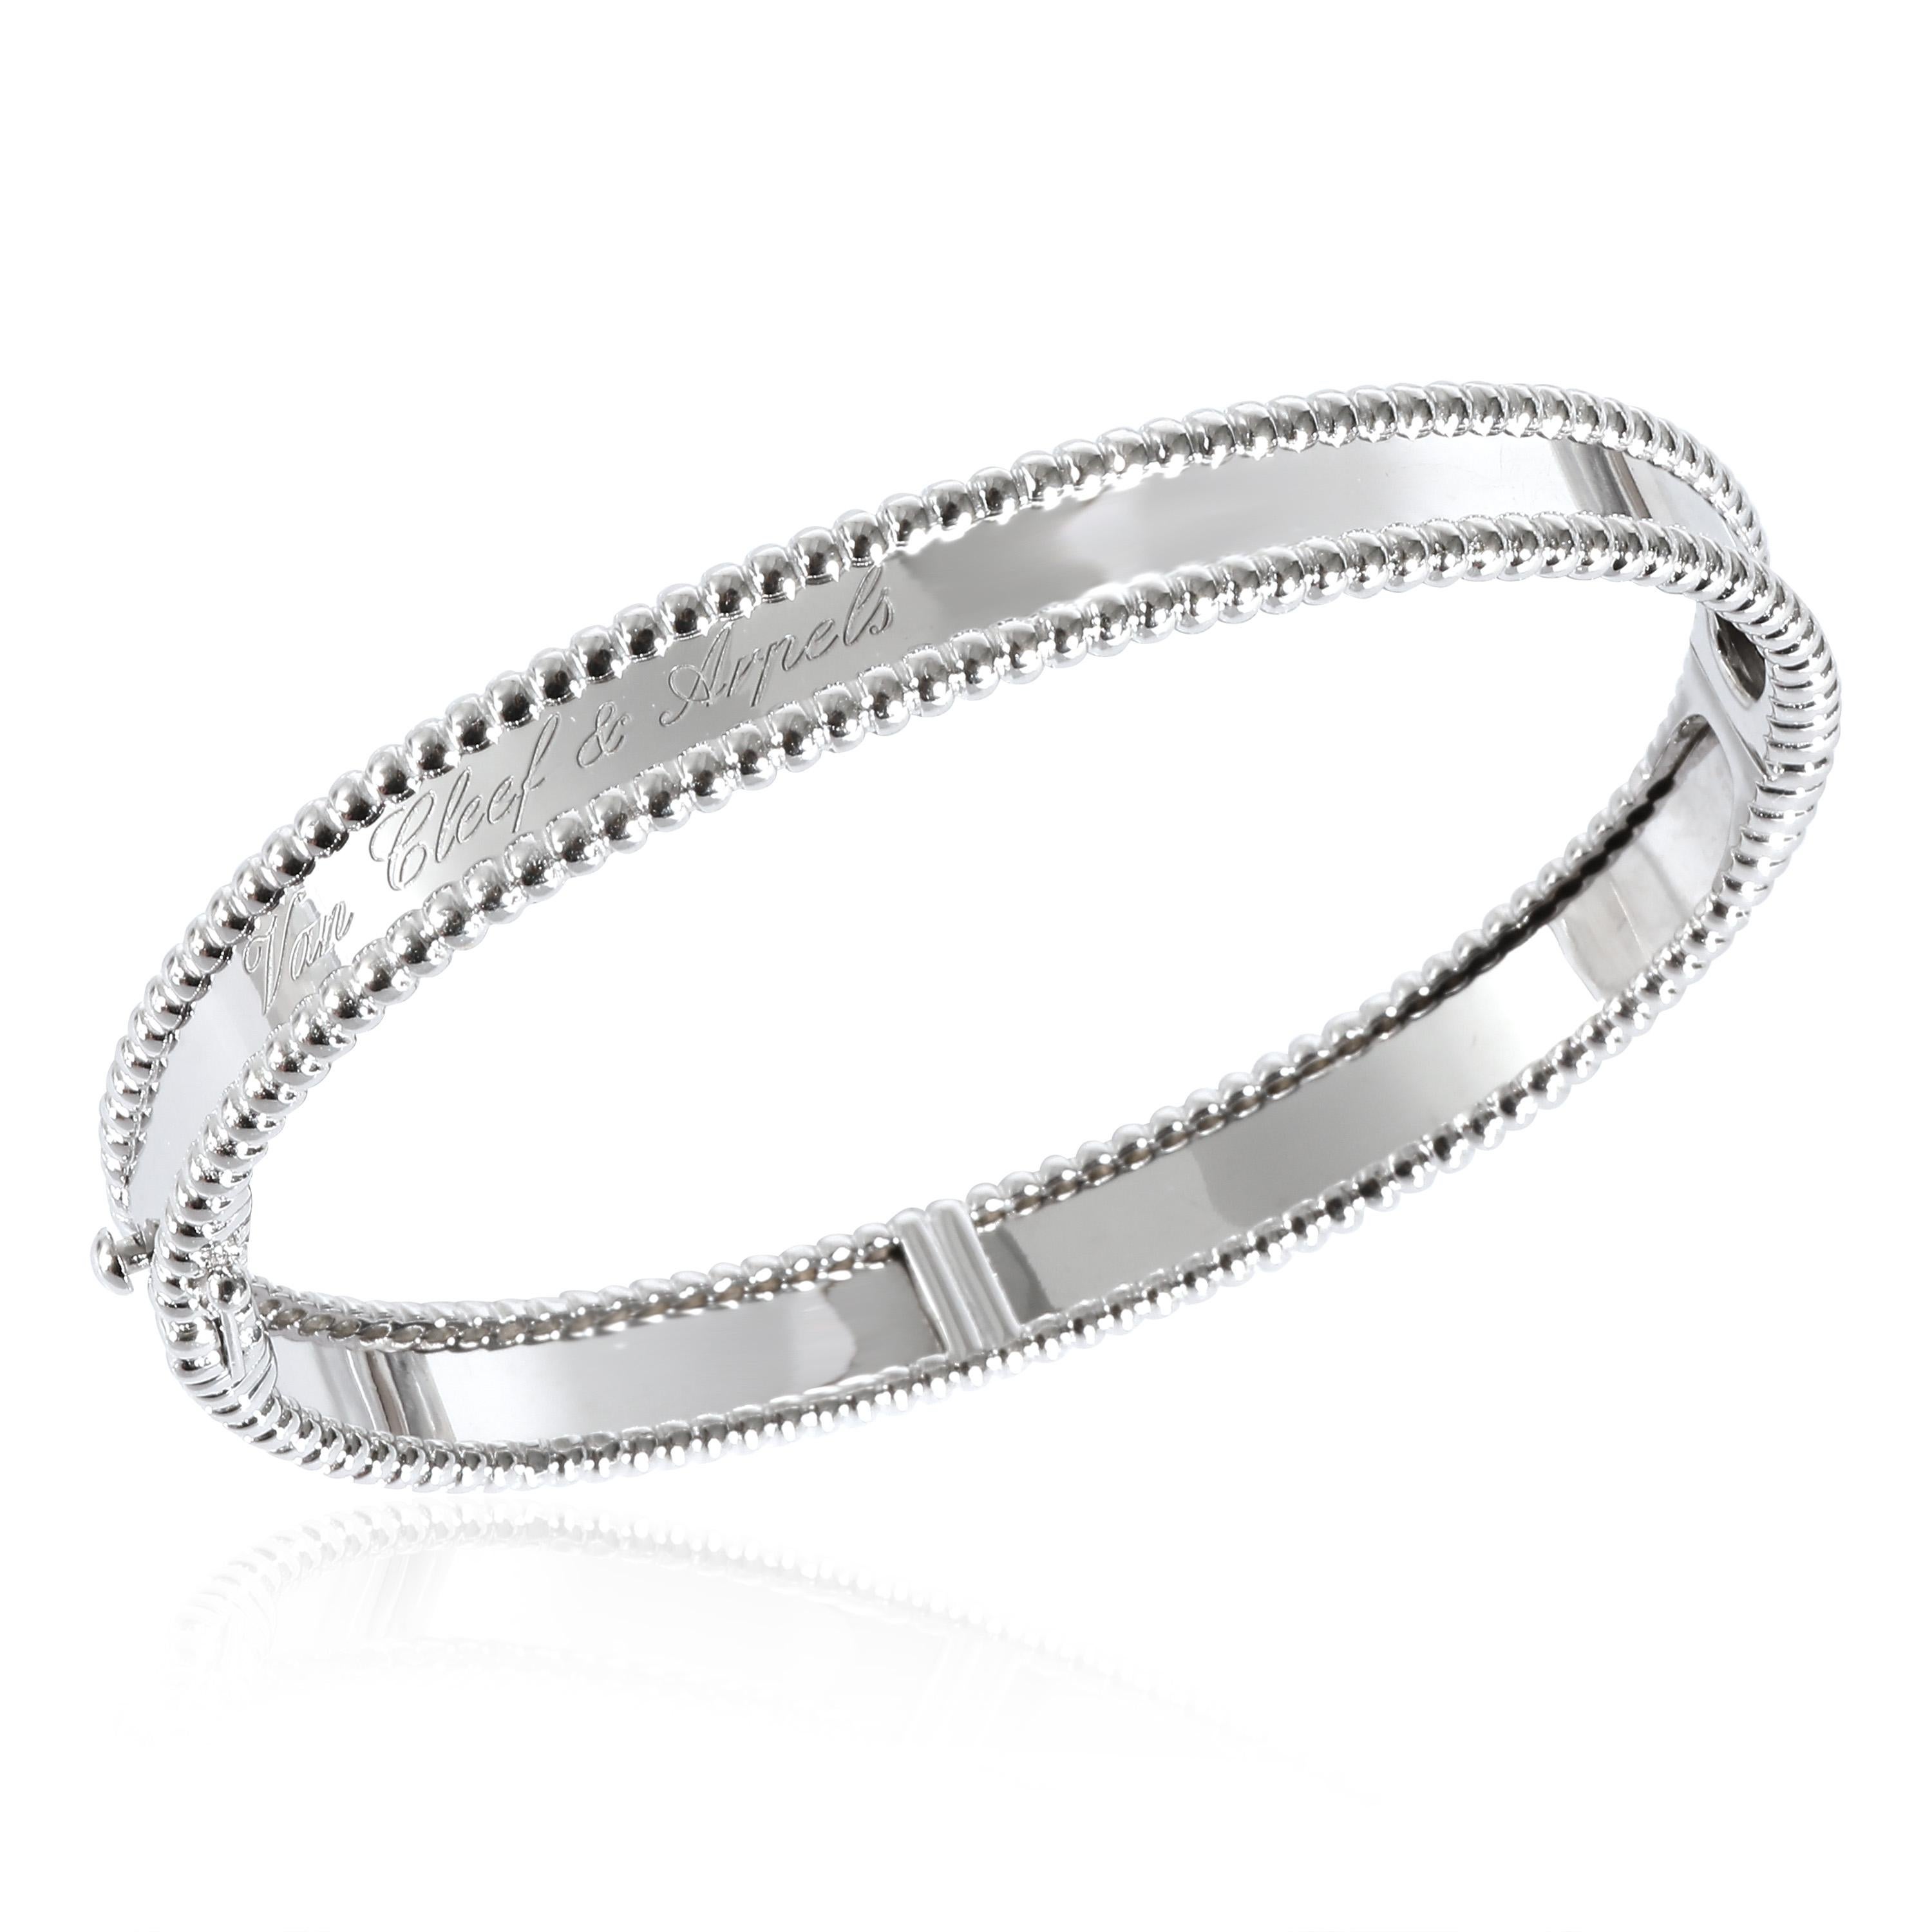 Van Cleef & Arpels Perlee Signature Bracelet in 18k White Gold

PRIMARY DETAILS
SKU: 136106
Listing Title: Van Cleef & Arpels Perlee Signature Bracelet in 18k White Gold
Condition Description: Drawing inspiration from the traditional Van Cleef &